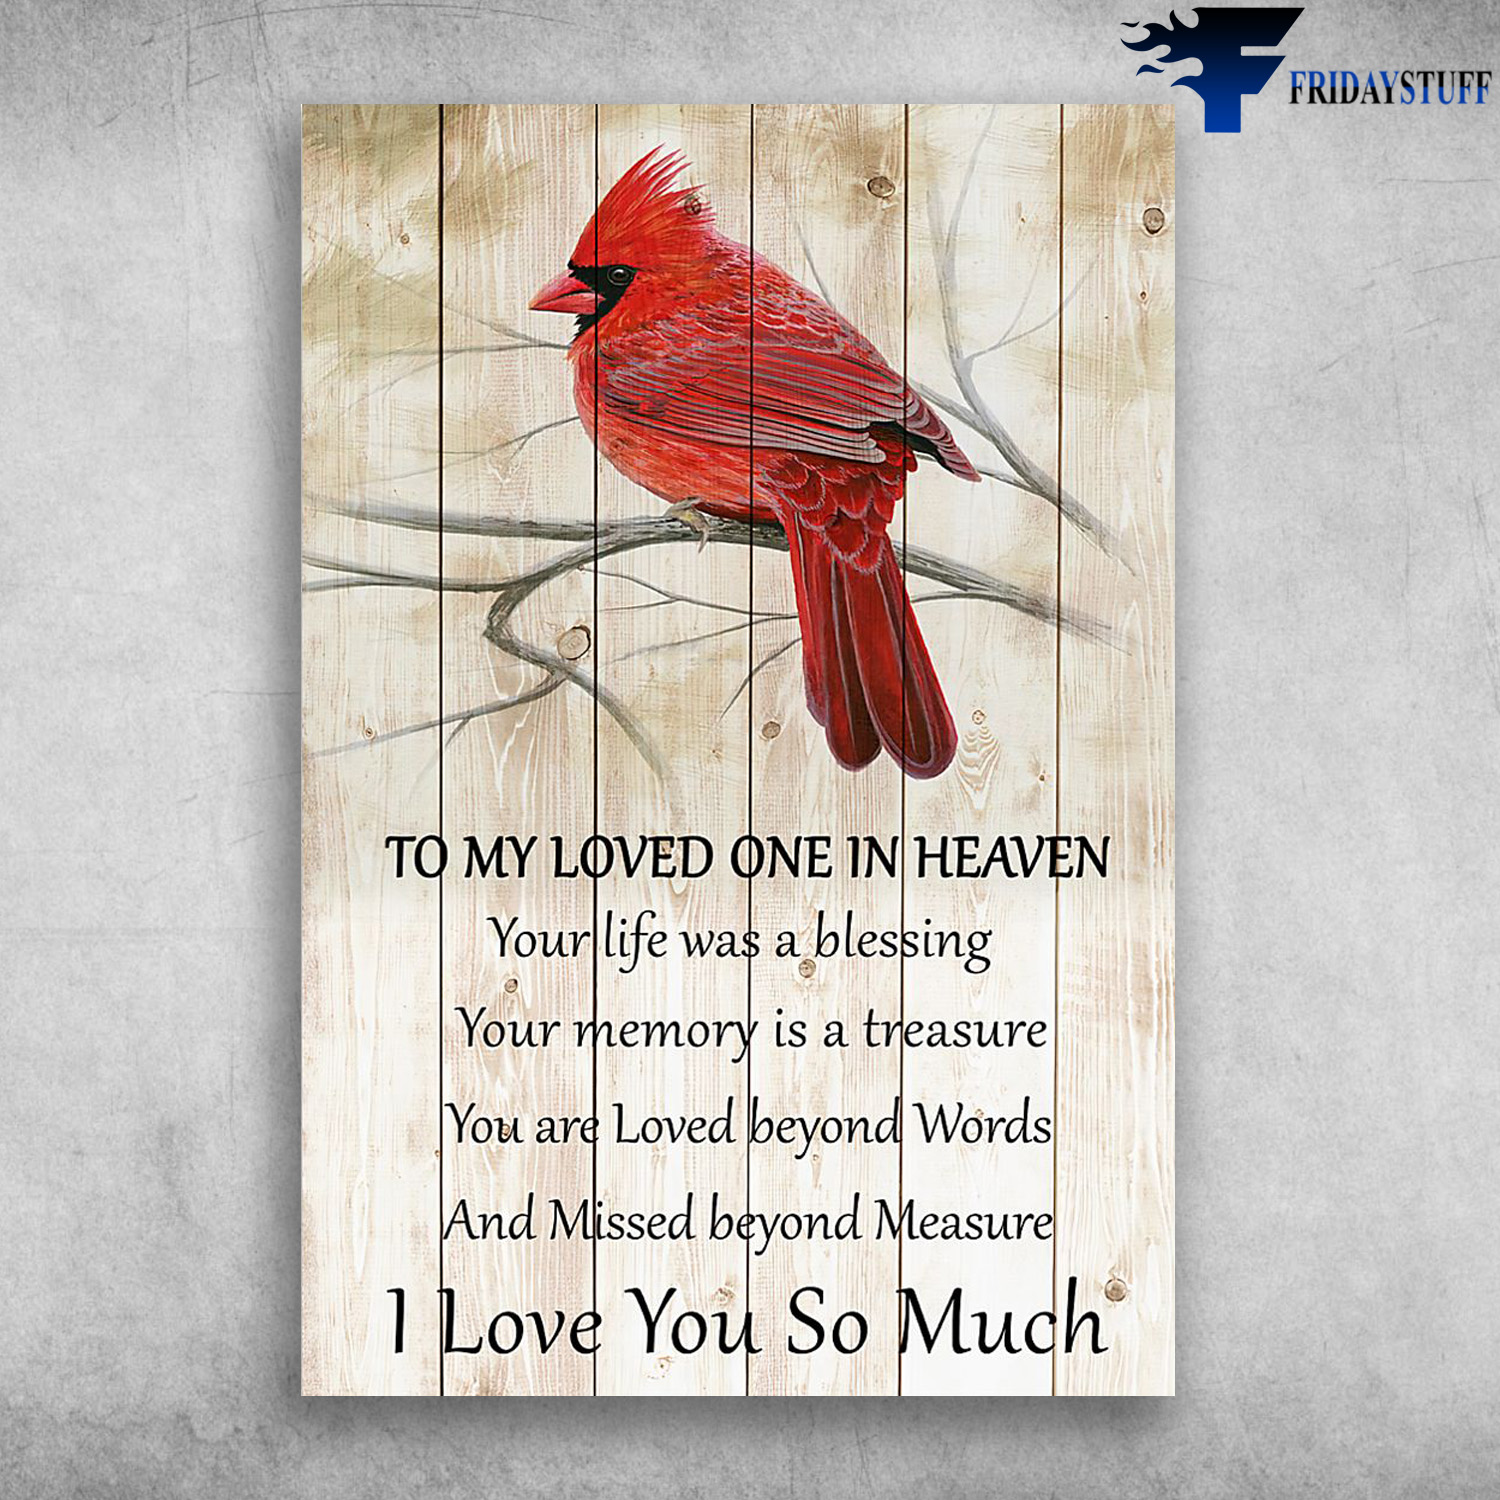 Cardinal Bird - To My Loved One In Heaven, Your Life Was A Blessing, Your Memory Is A Treasure, You Are Loved Beyond Words, And Missed Beyond Measure, I Love You So Much